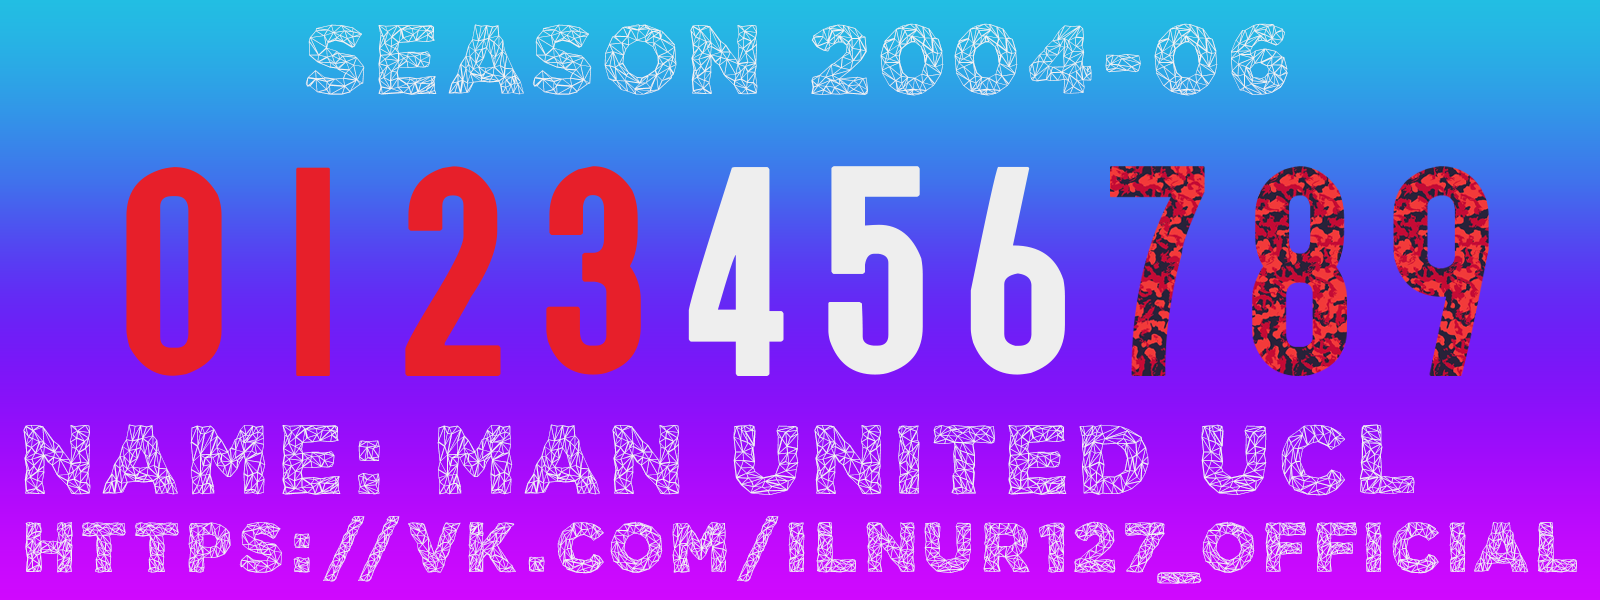 Man United UCL 2004-06 (kitnumbers).png